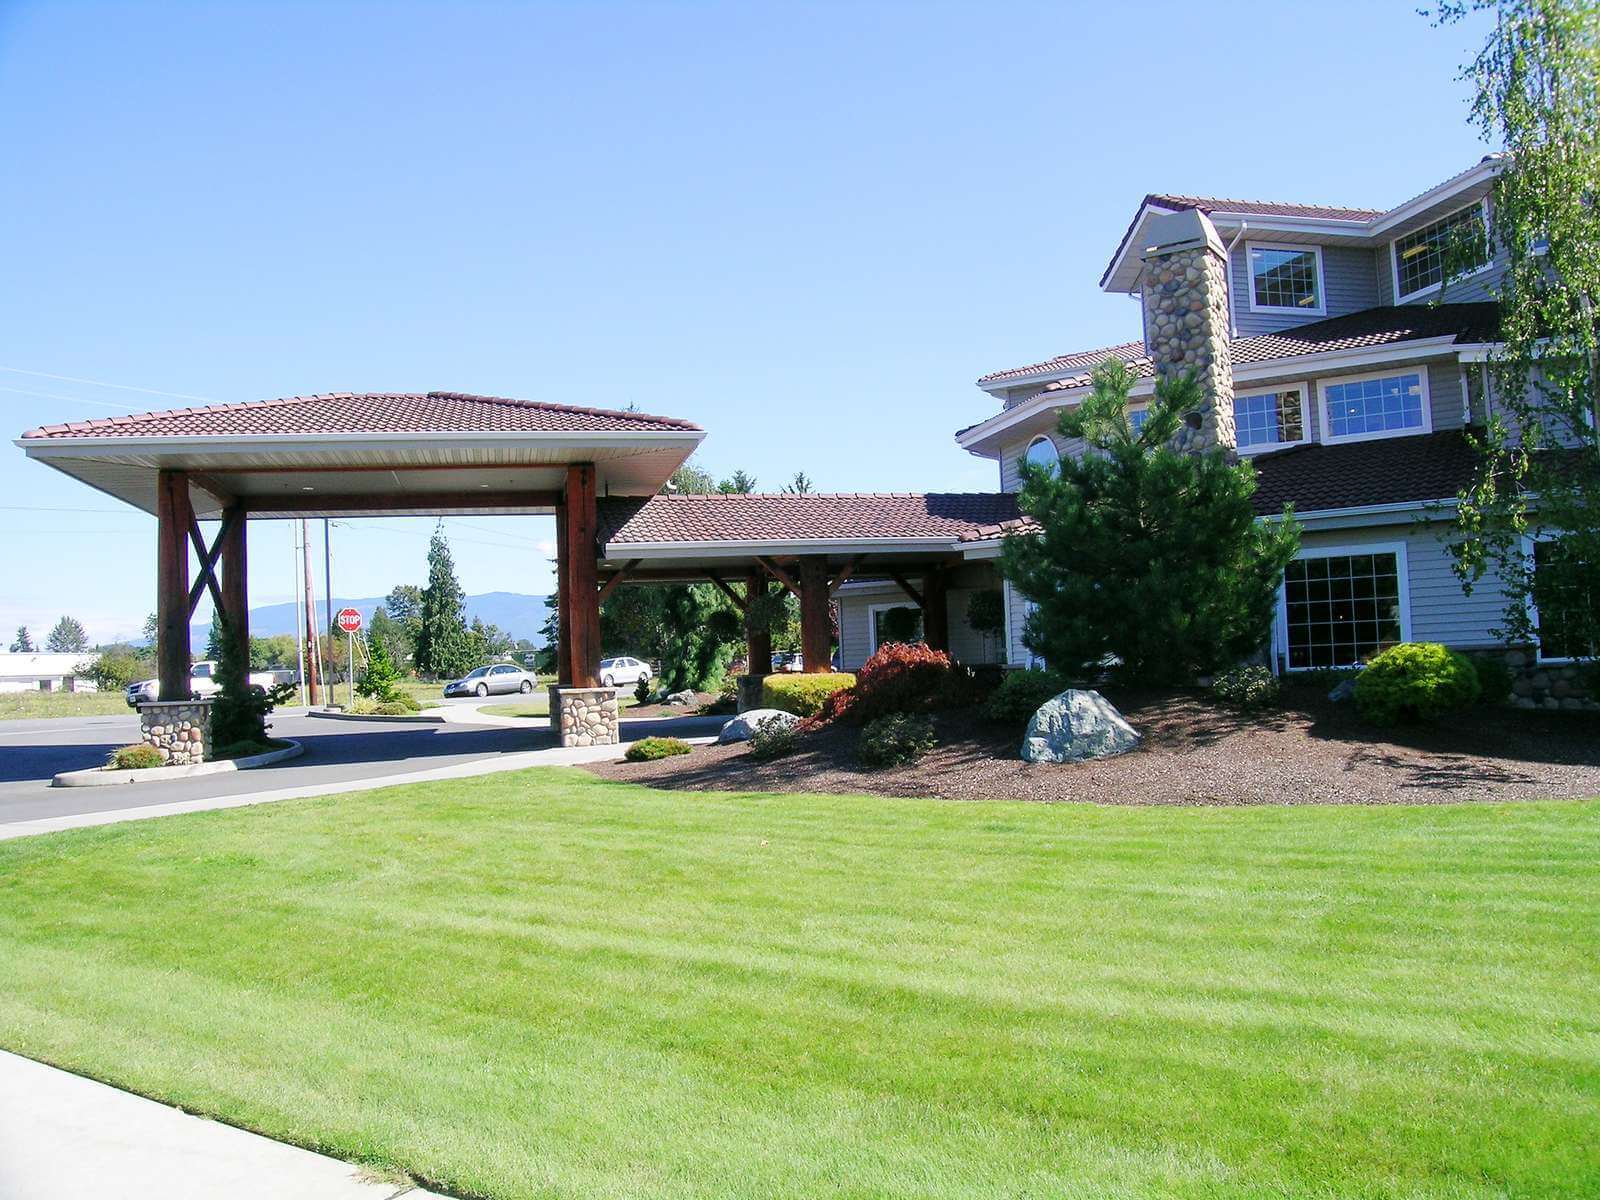 RidgeView Assisted Living